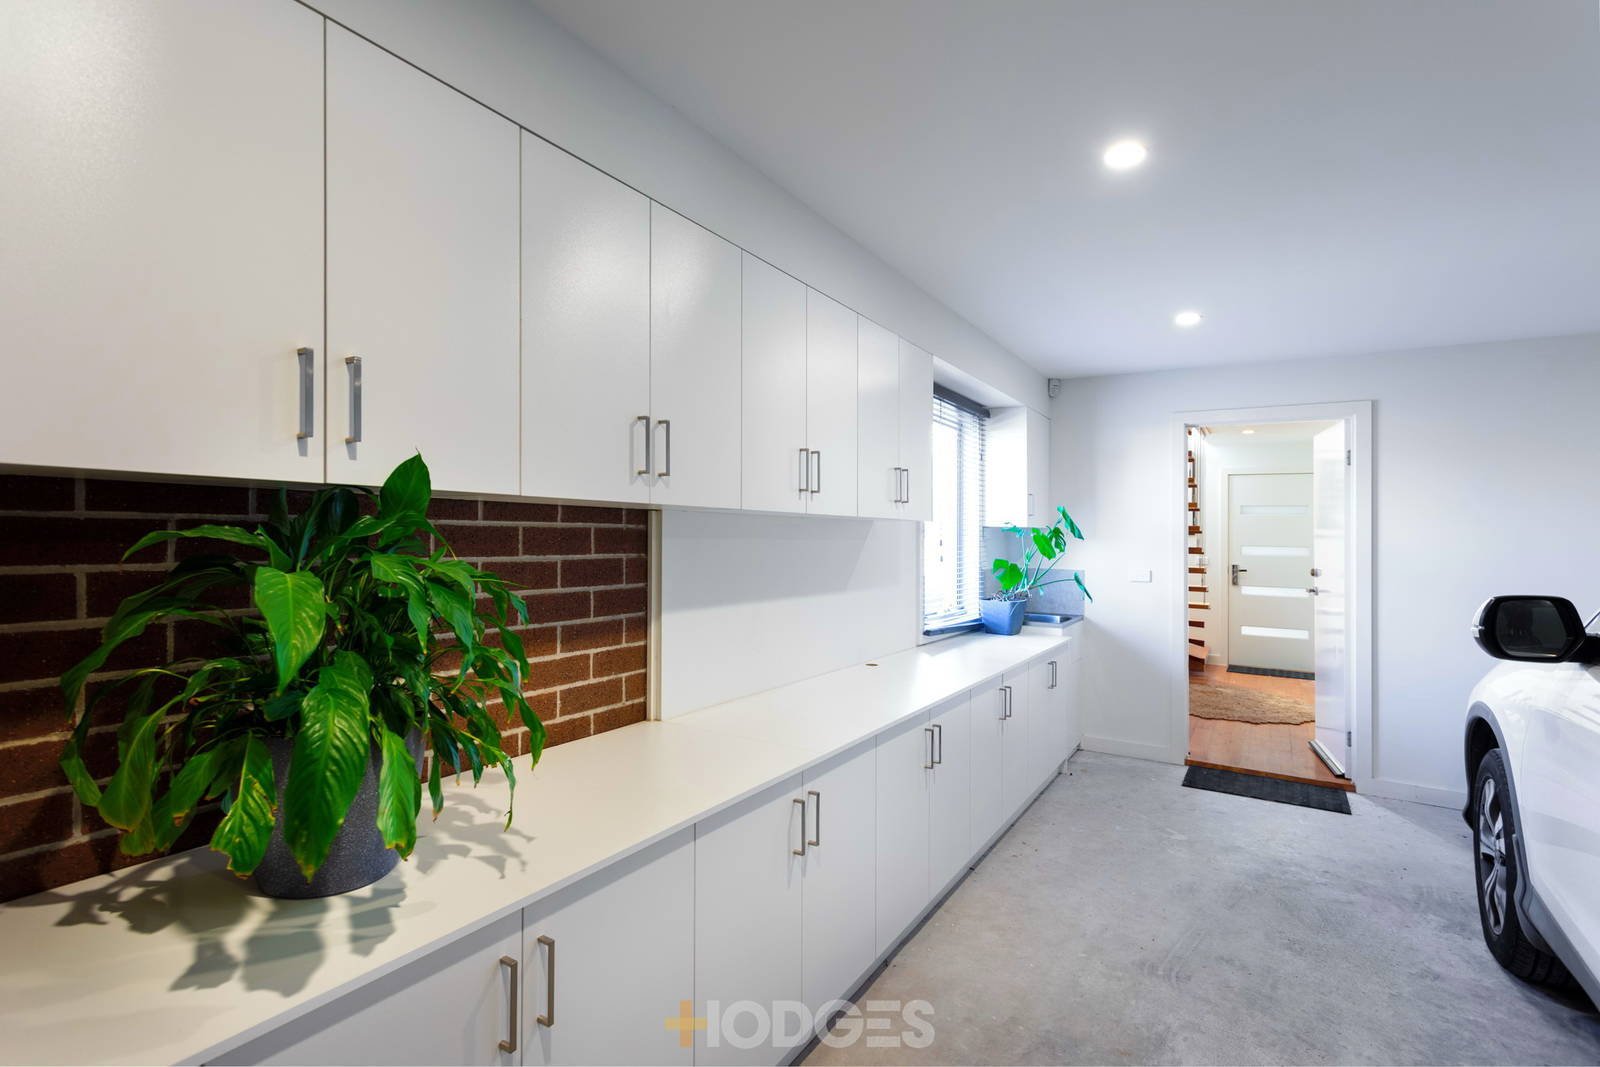 1 / 247 Williamstown Road Yarraville